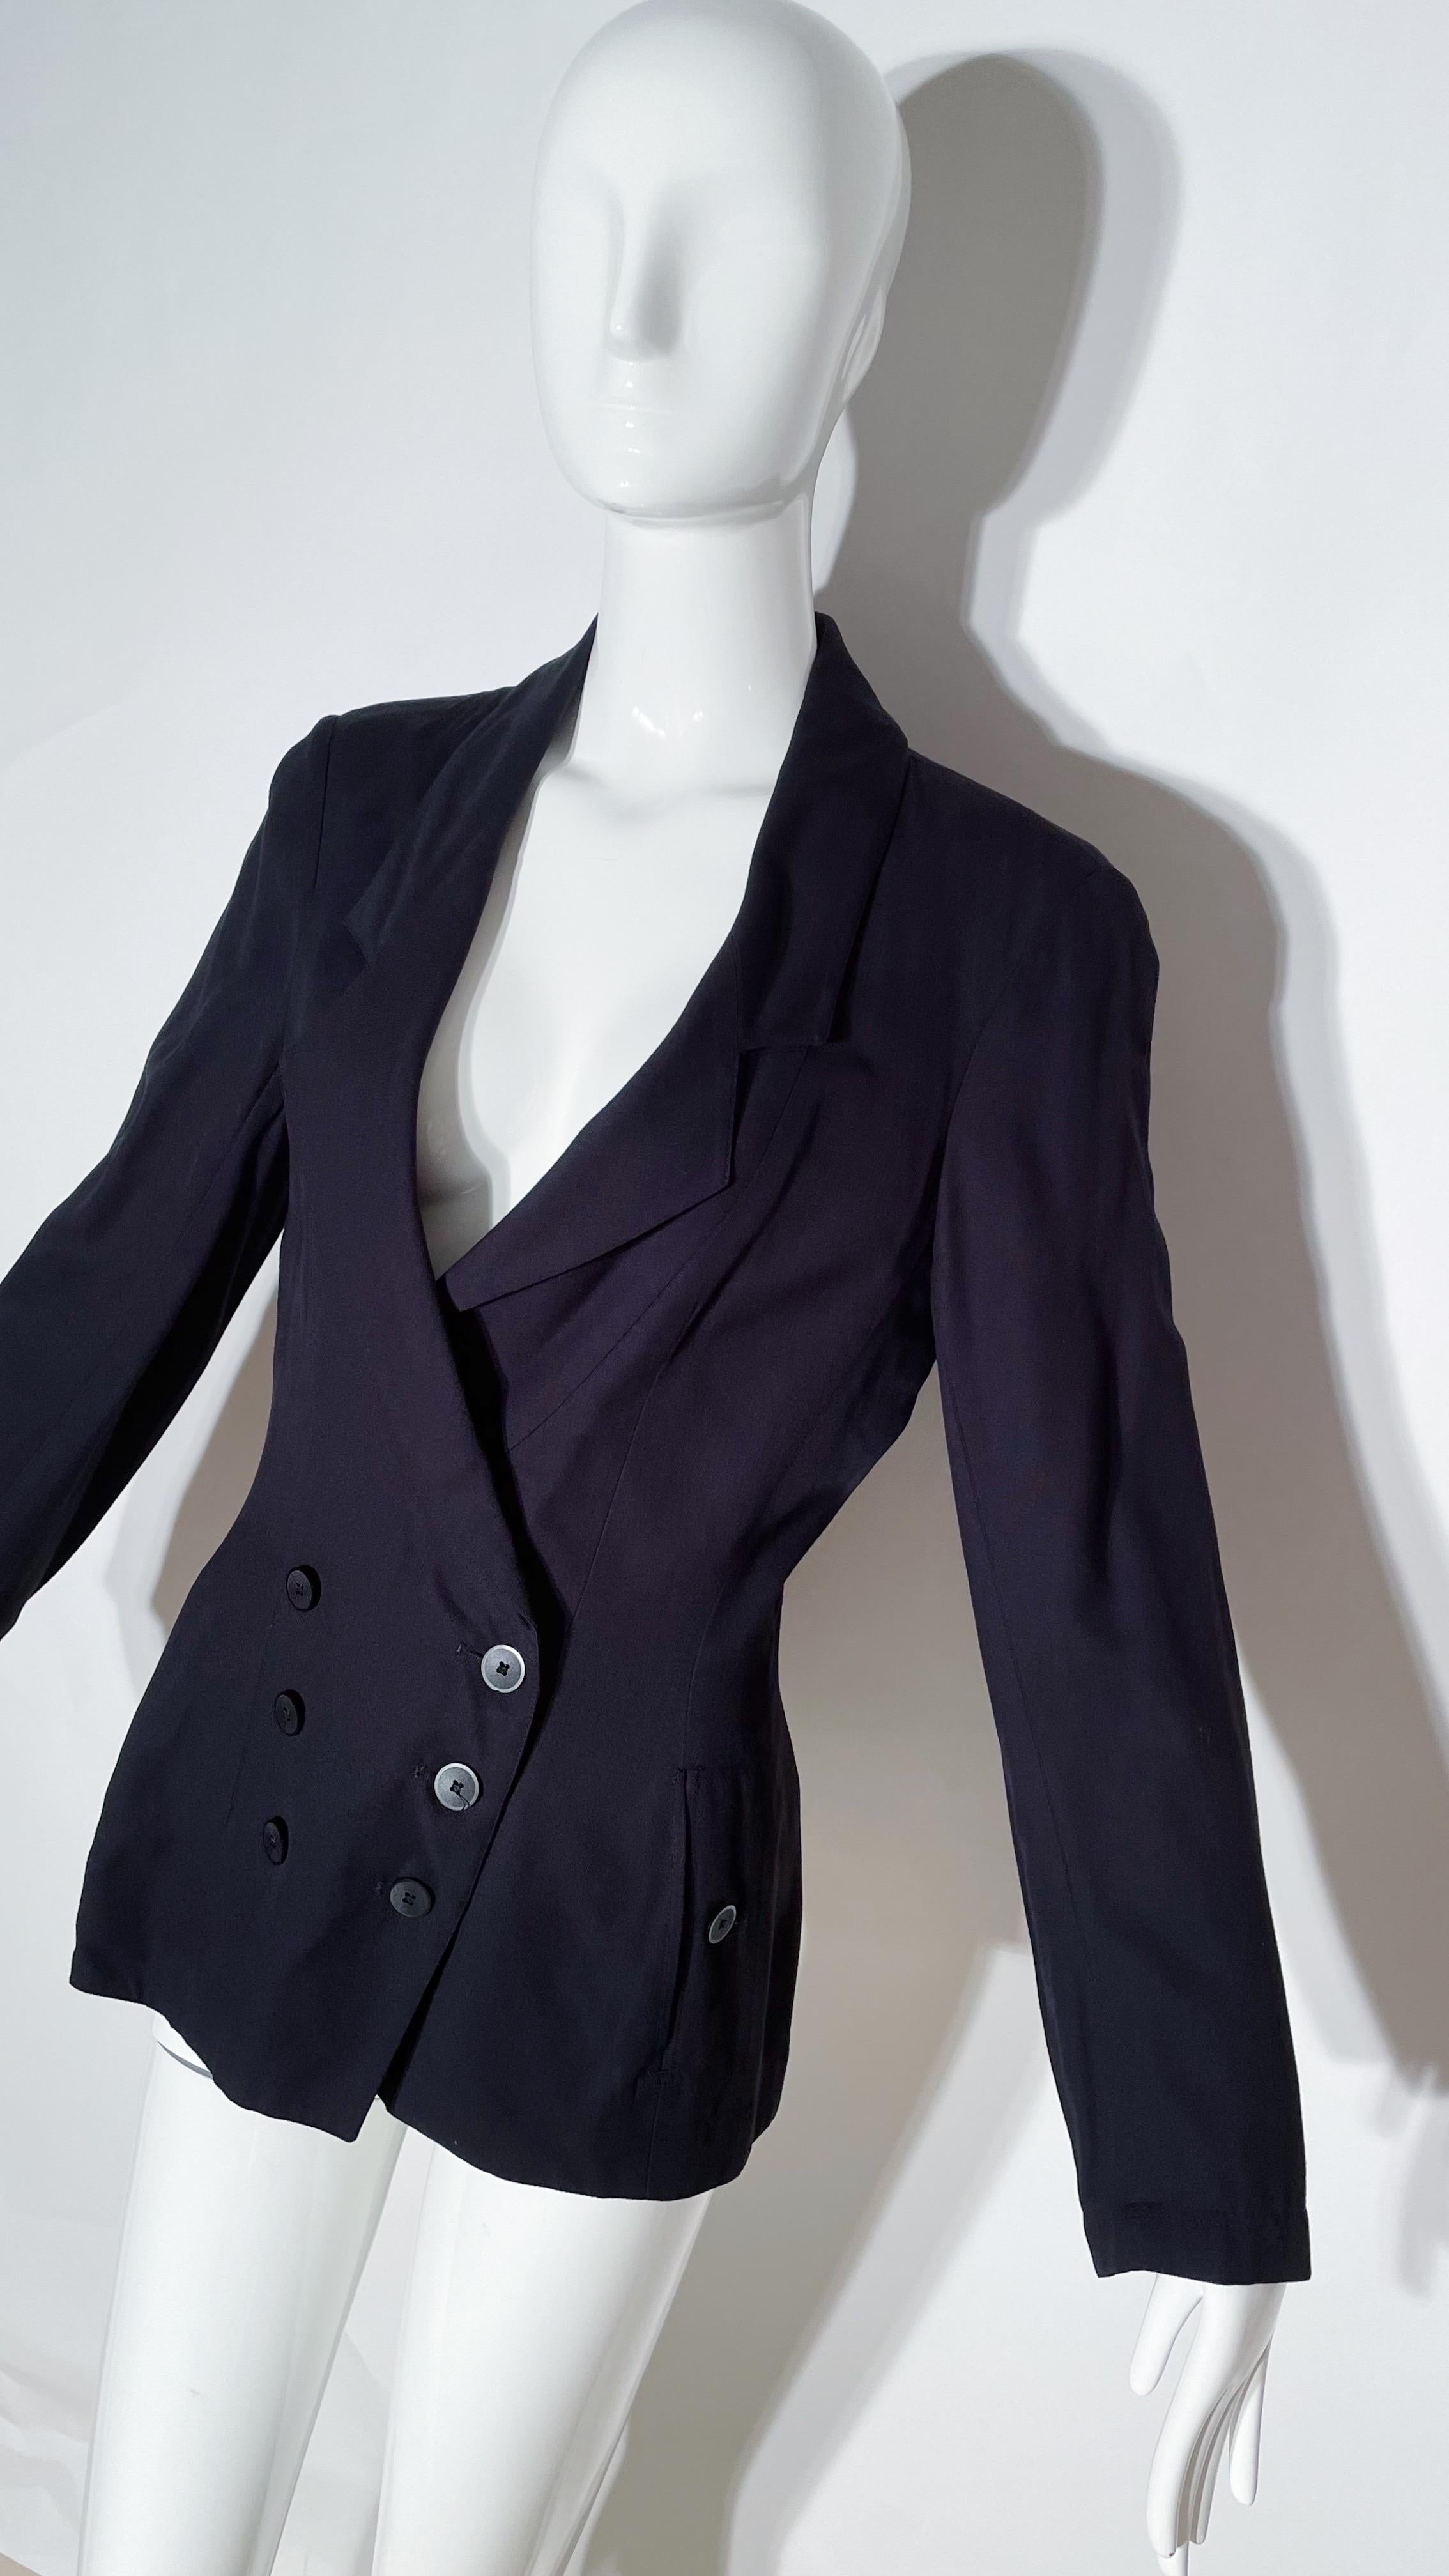 Black double breasted blazer. Collared. Fitted style. Button closures. Front pockets. Viscose.
*Condition: Excellent vintage condition. No visible Flaws.

Measurements Taken Laying Flat (inches)—
Shoulder to Shoulder: 16 in.
Sleeve Length: 24